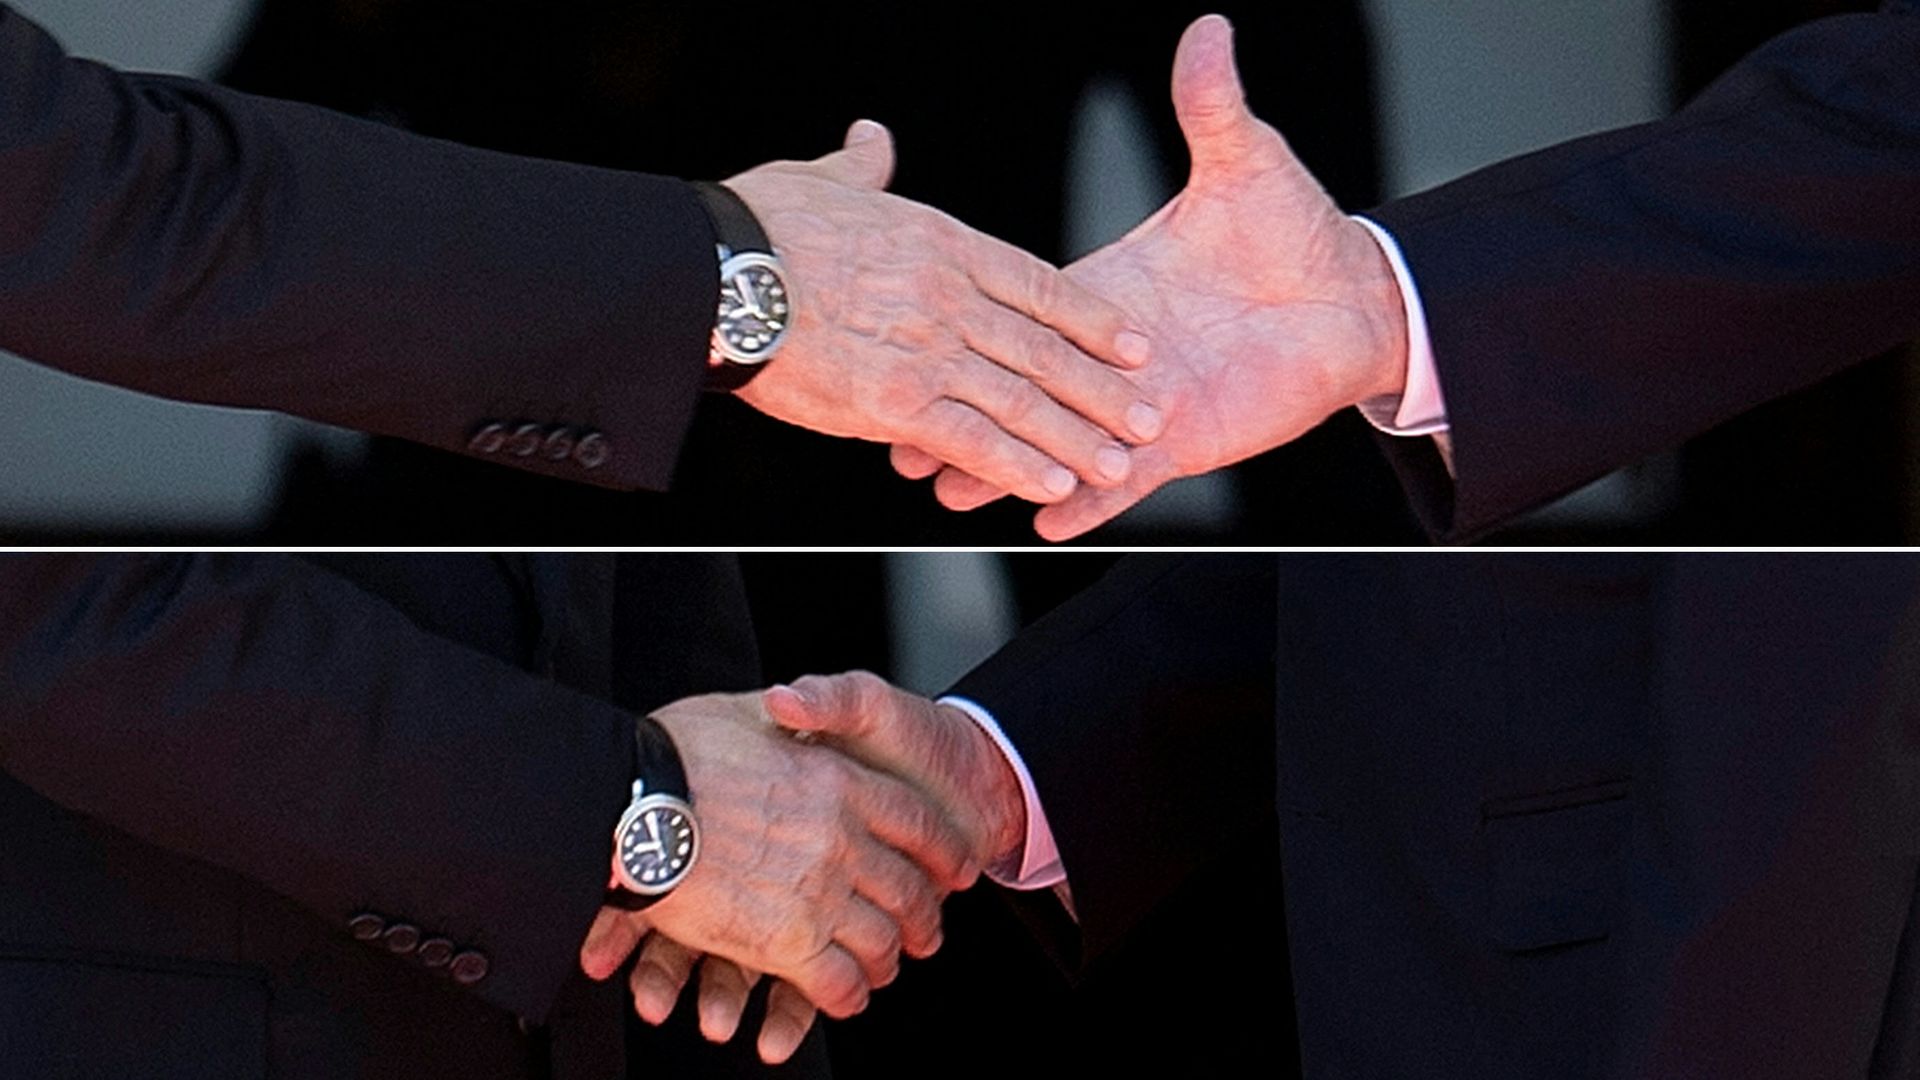 The hands of President Vladimir Putin and President Biden are seen approaching and grasping in a three-shot sequence of their handshake in Geneva.